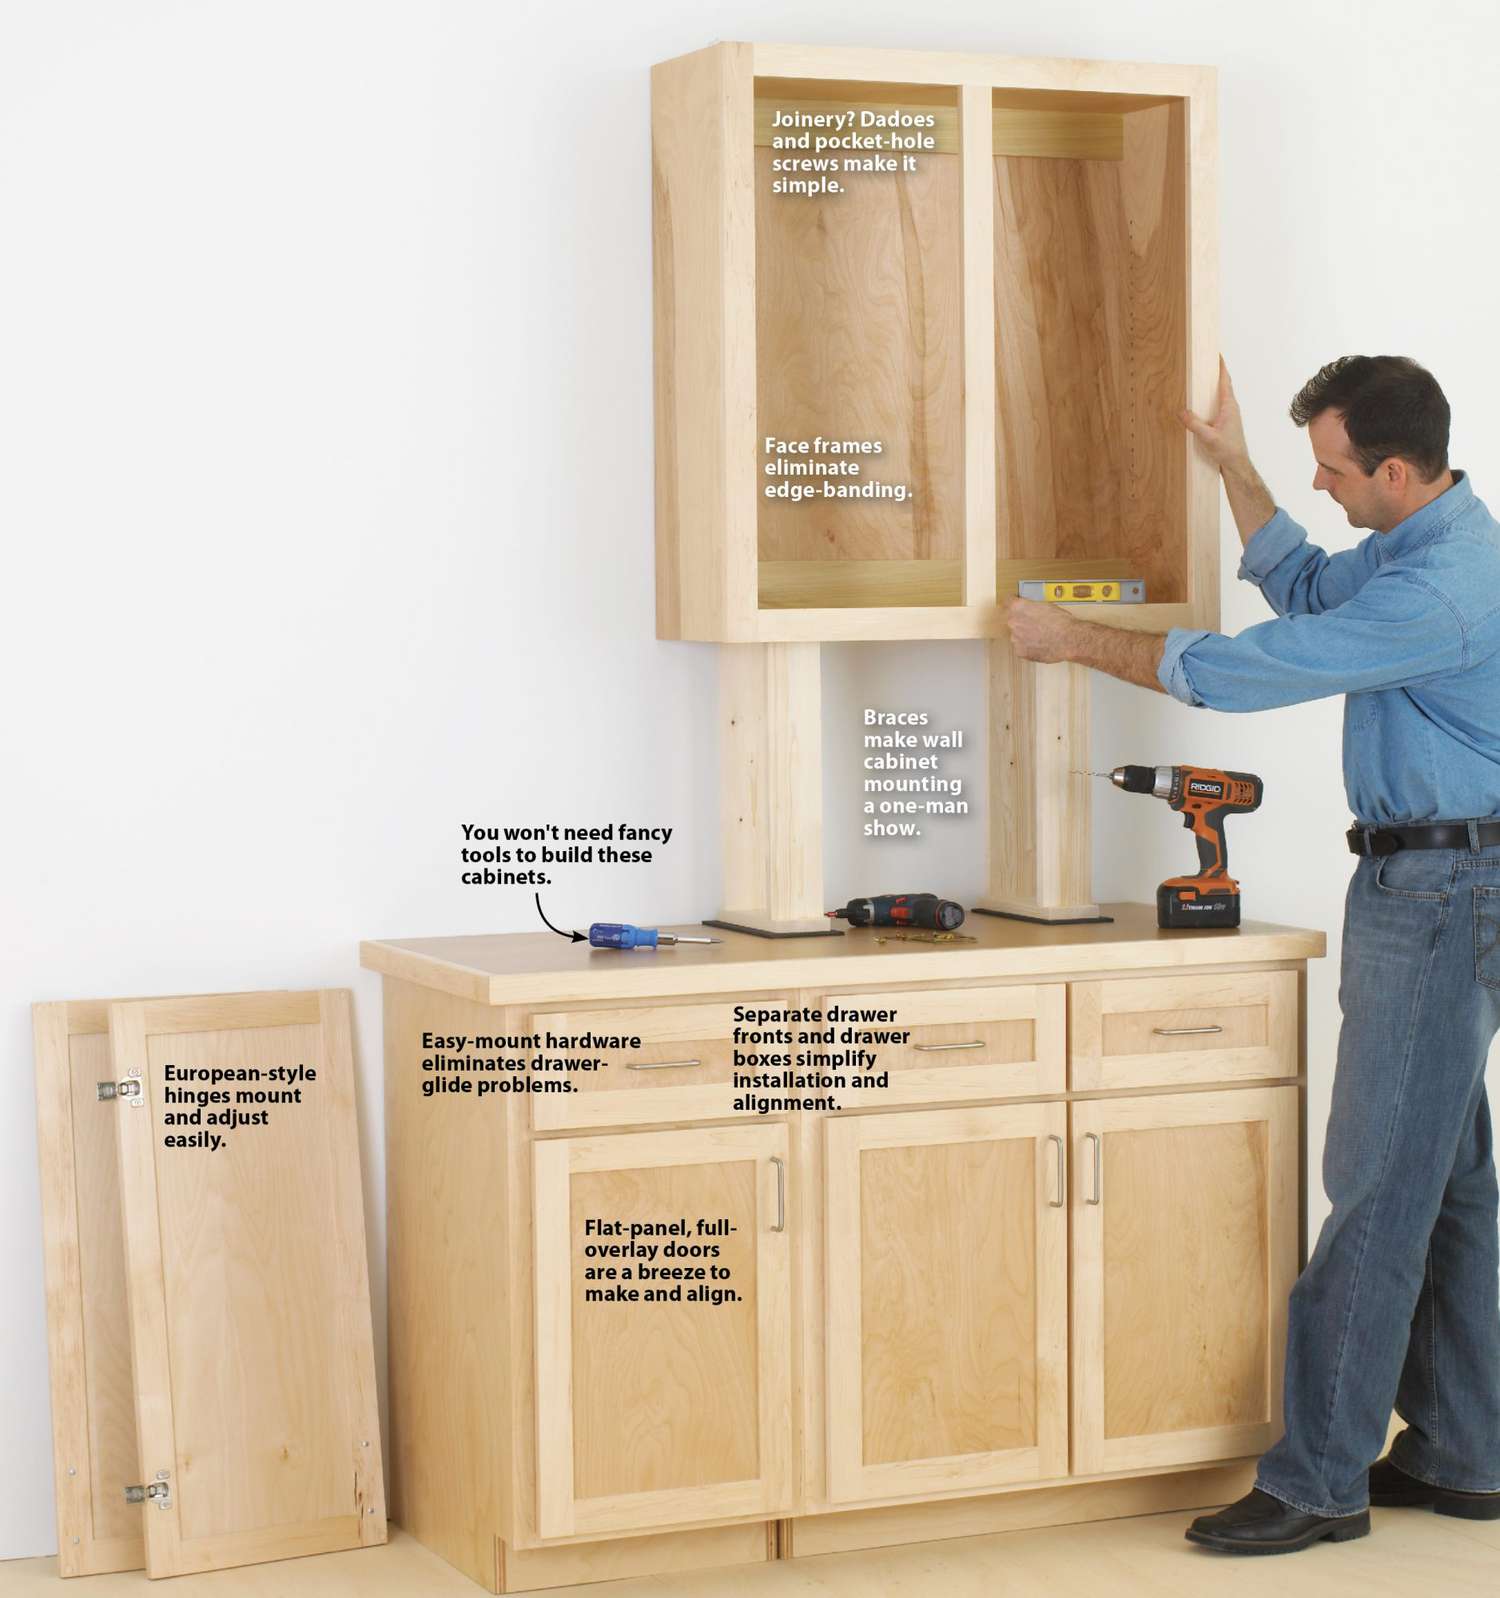 Make Cabinets The Easy Way Wood, How To Make Simple Face Frame Cabinets